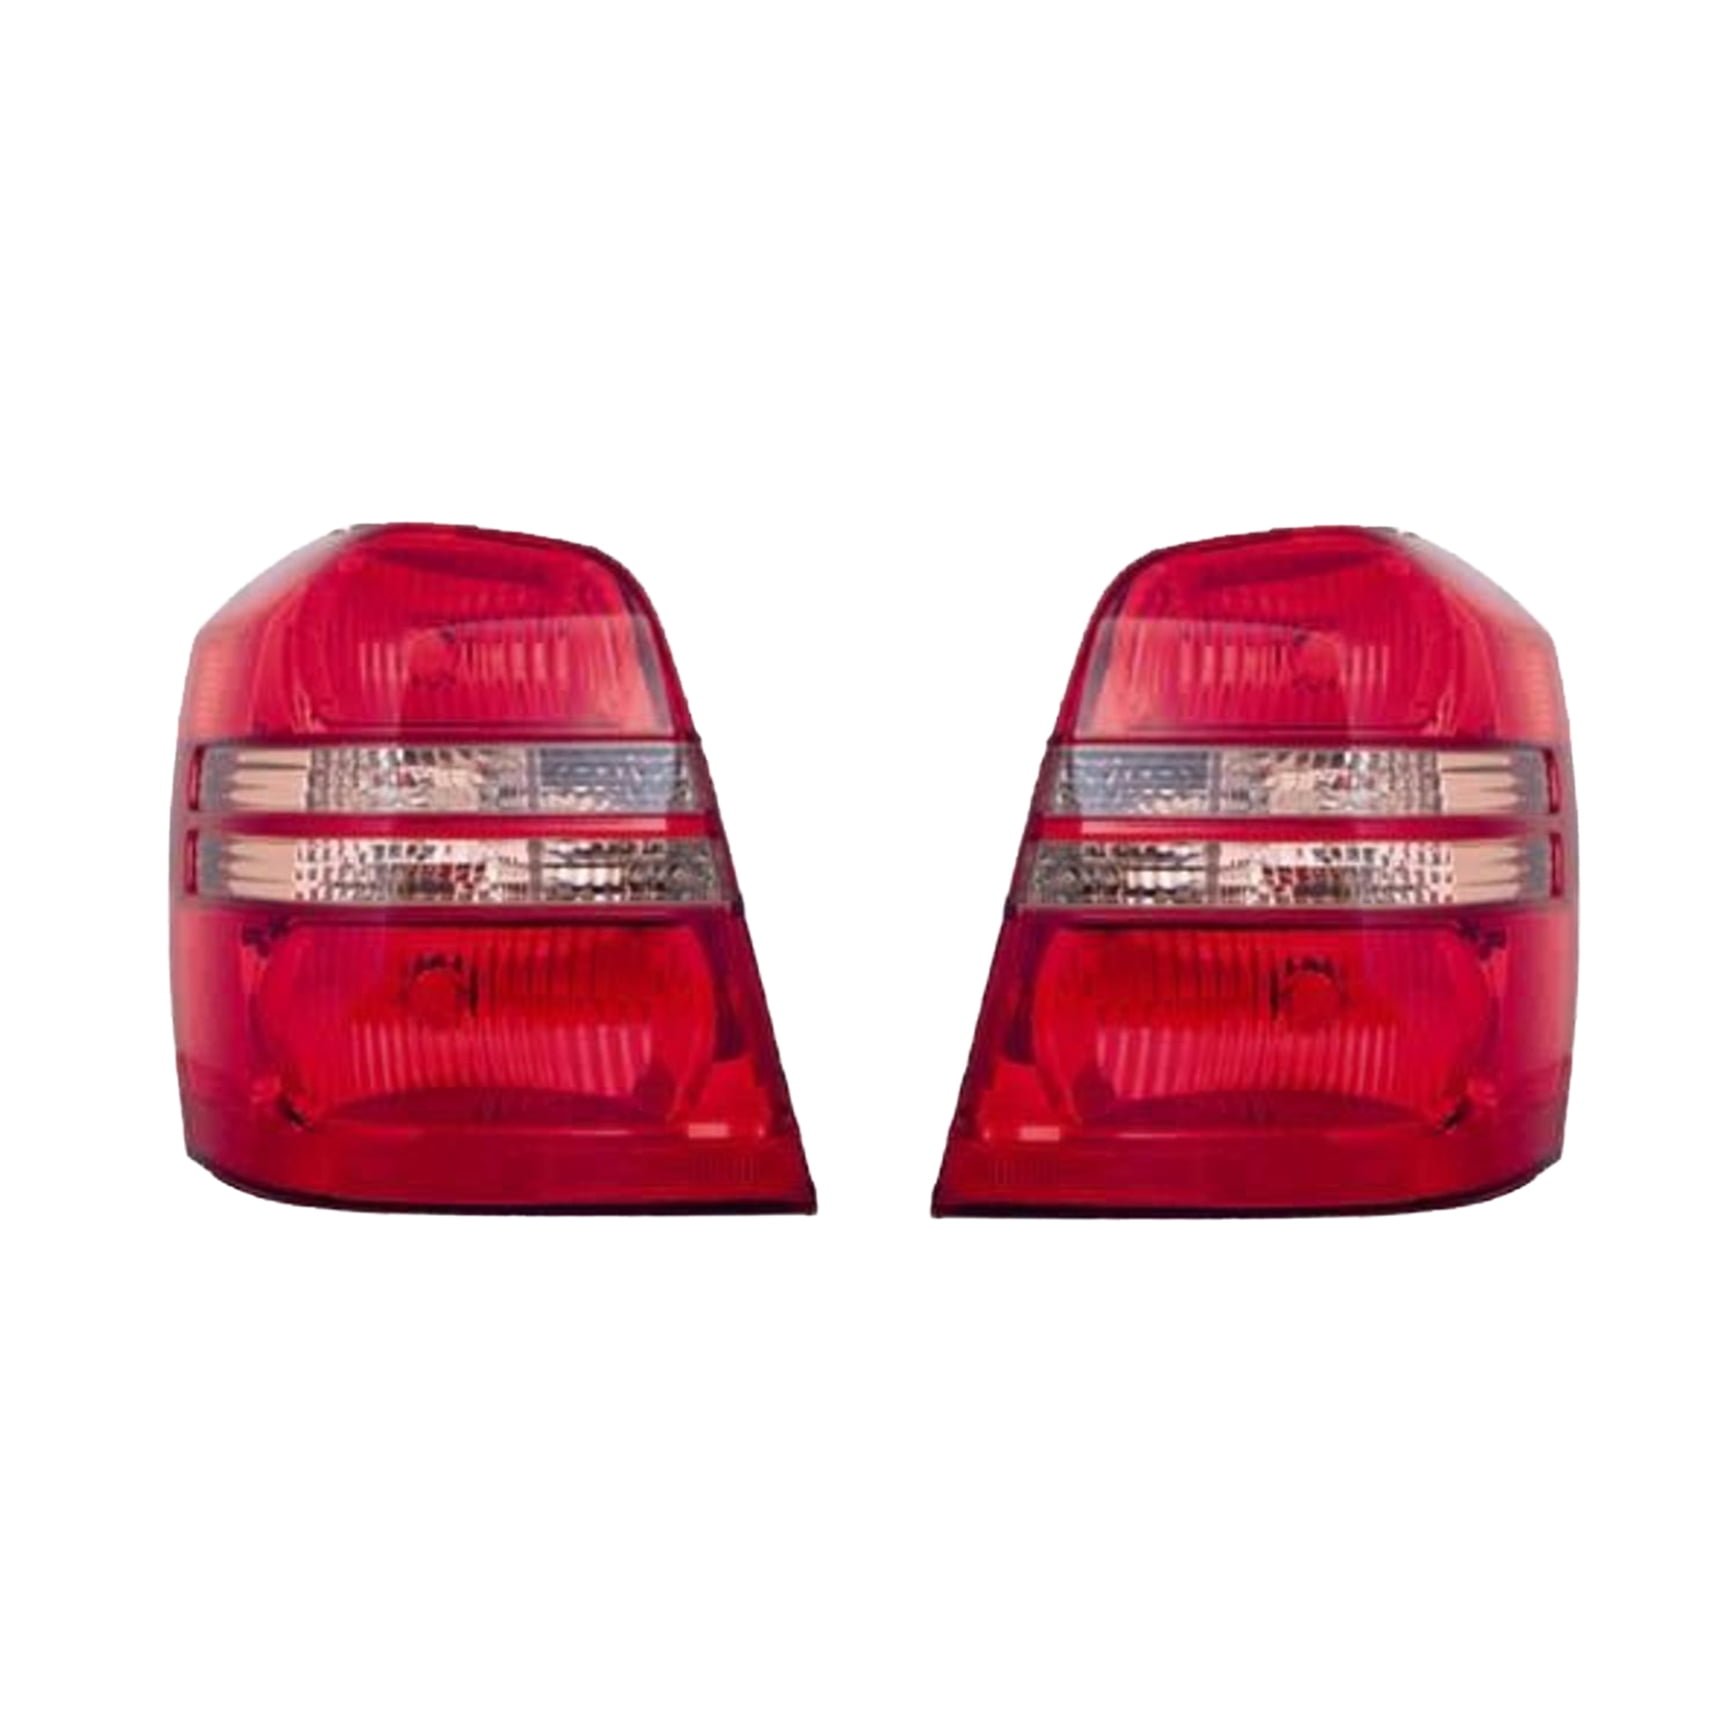 NEW RIGHT TAIL LIGHT TOYOTA HIGHLANDER 2001-03 TO2819119 81551-48050 8155148050